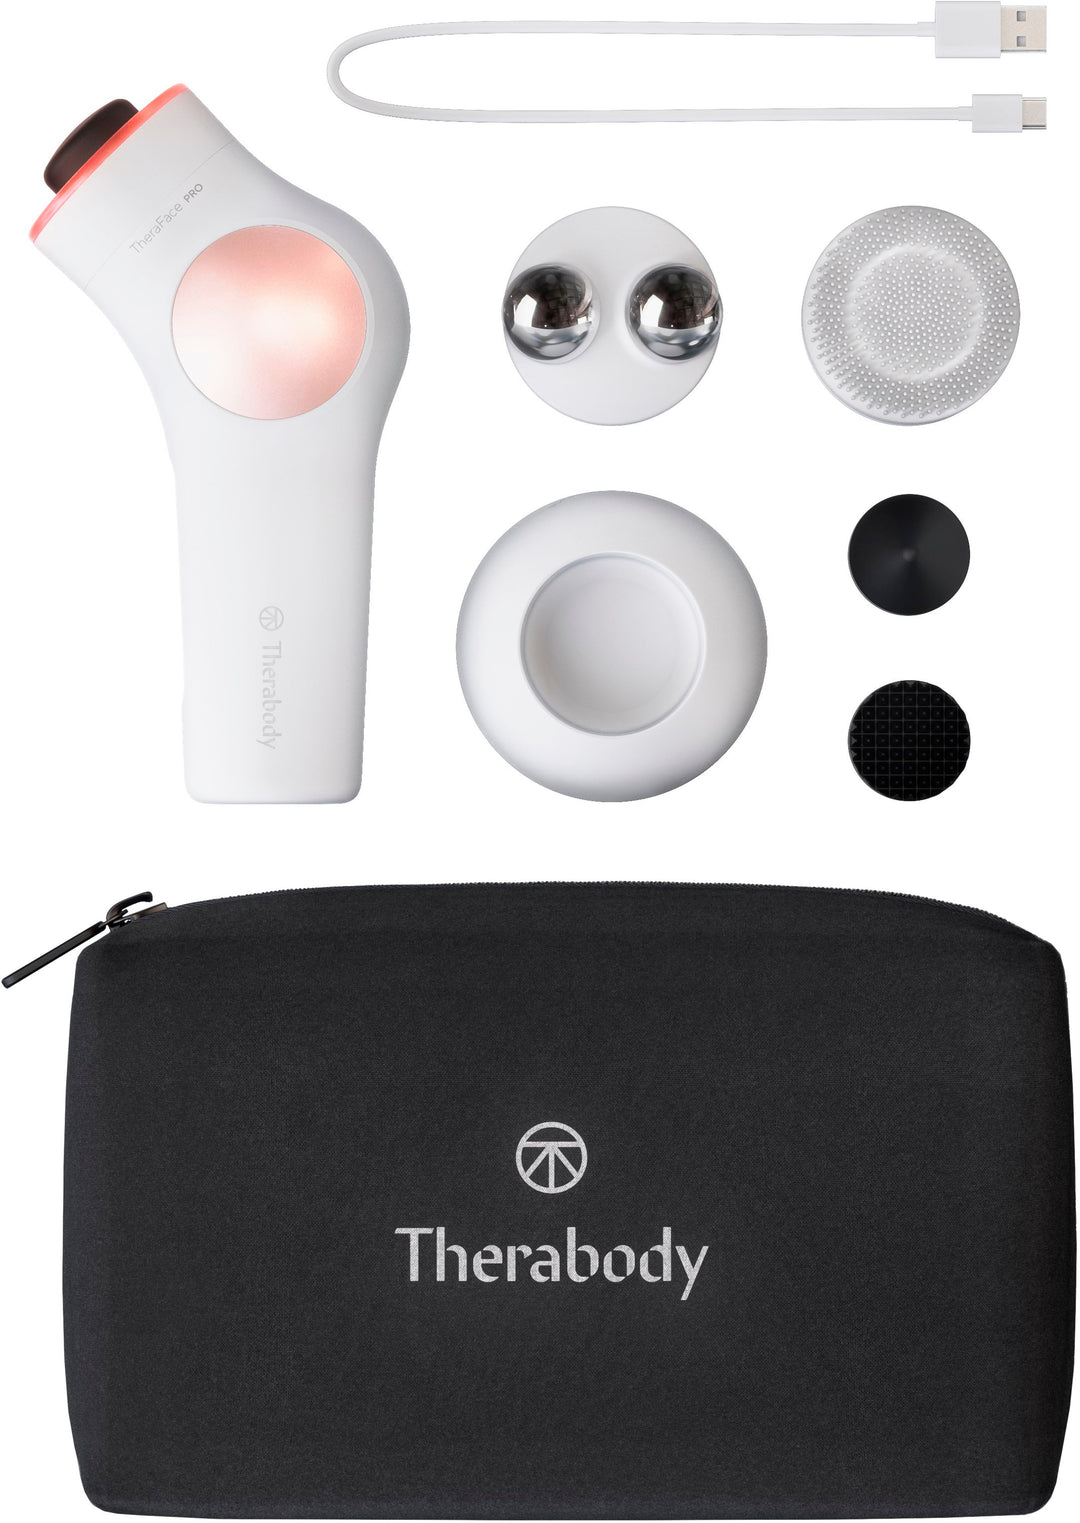 Therabody - TheraFace PRO 6-in-1 Facial Health Device - White_21